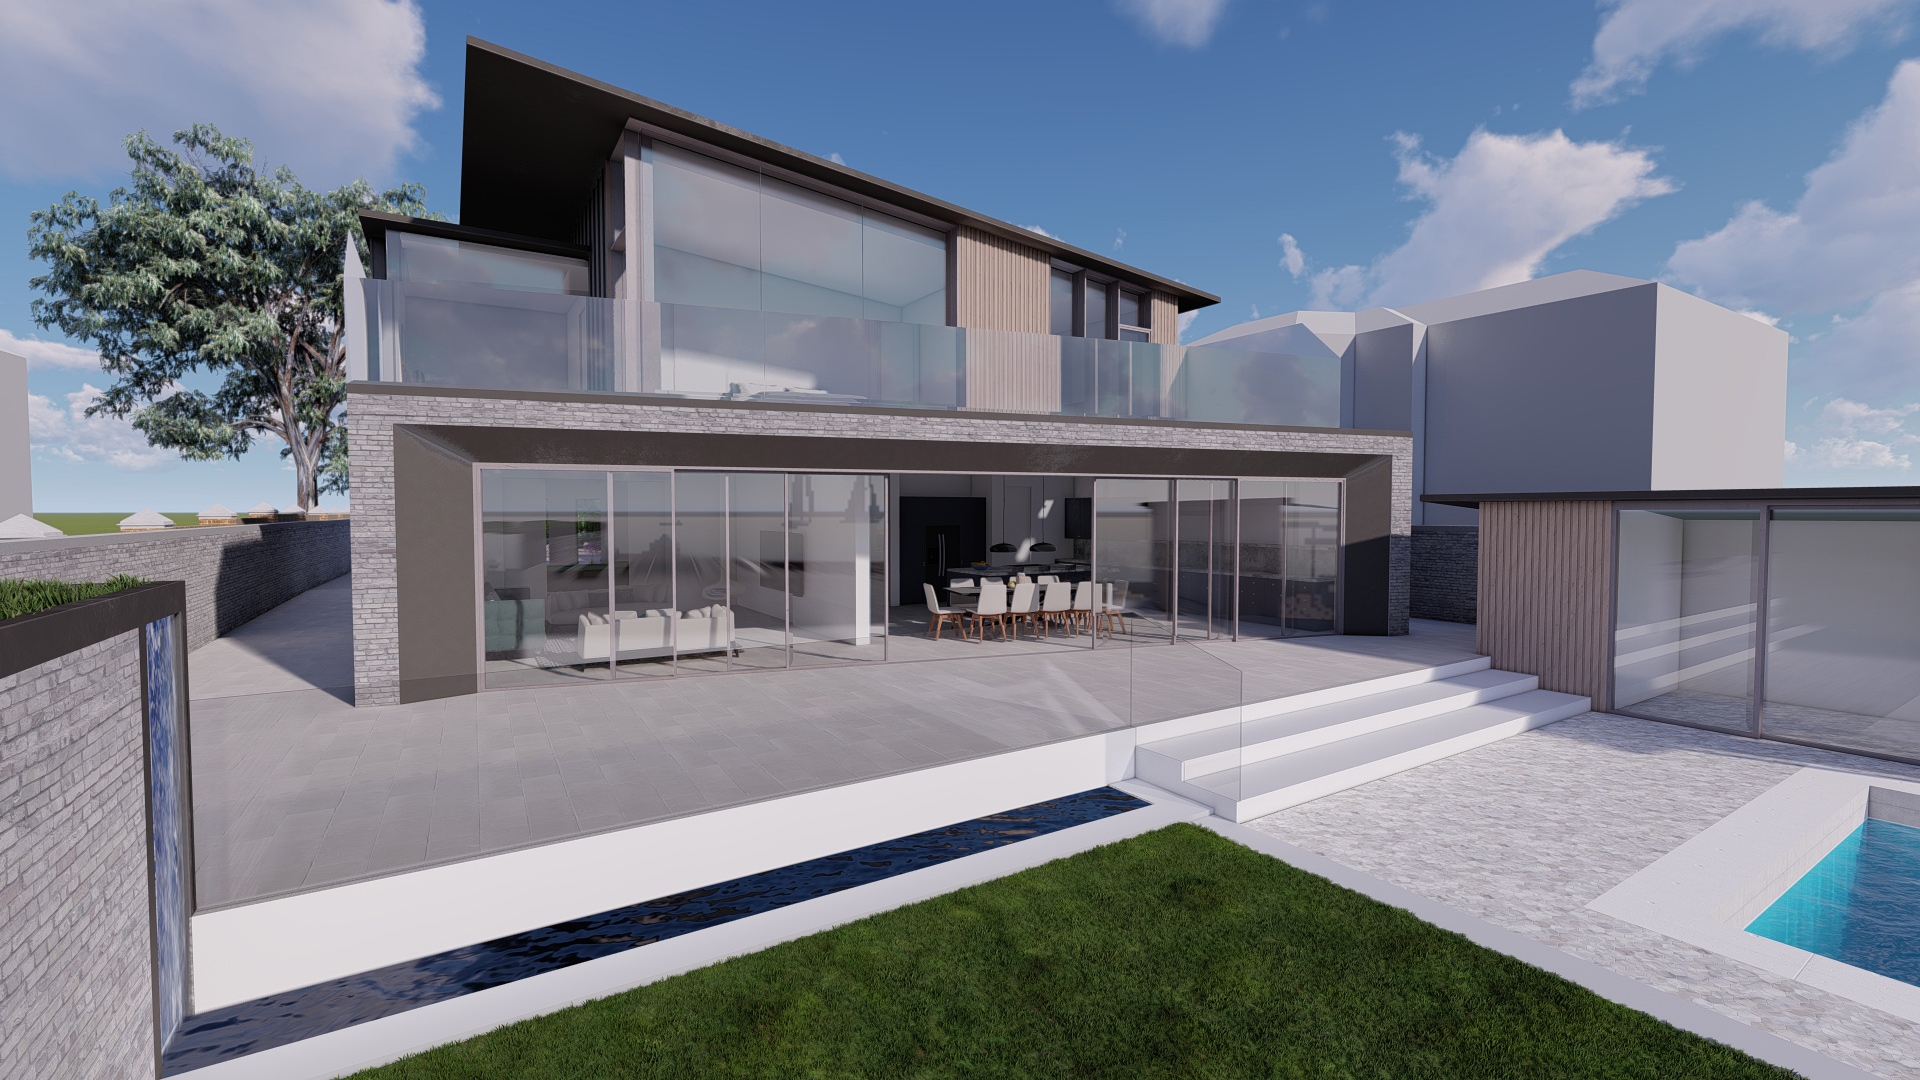 visual rear view of modern new build with outdoor swimming pool and large sliding glass doors on ground floor